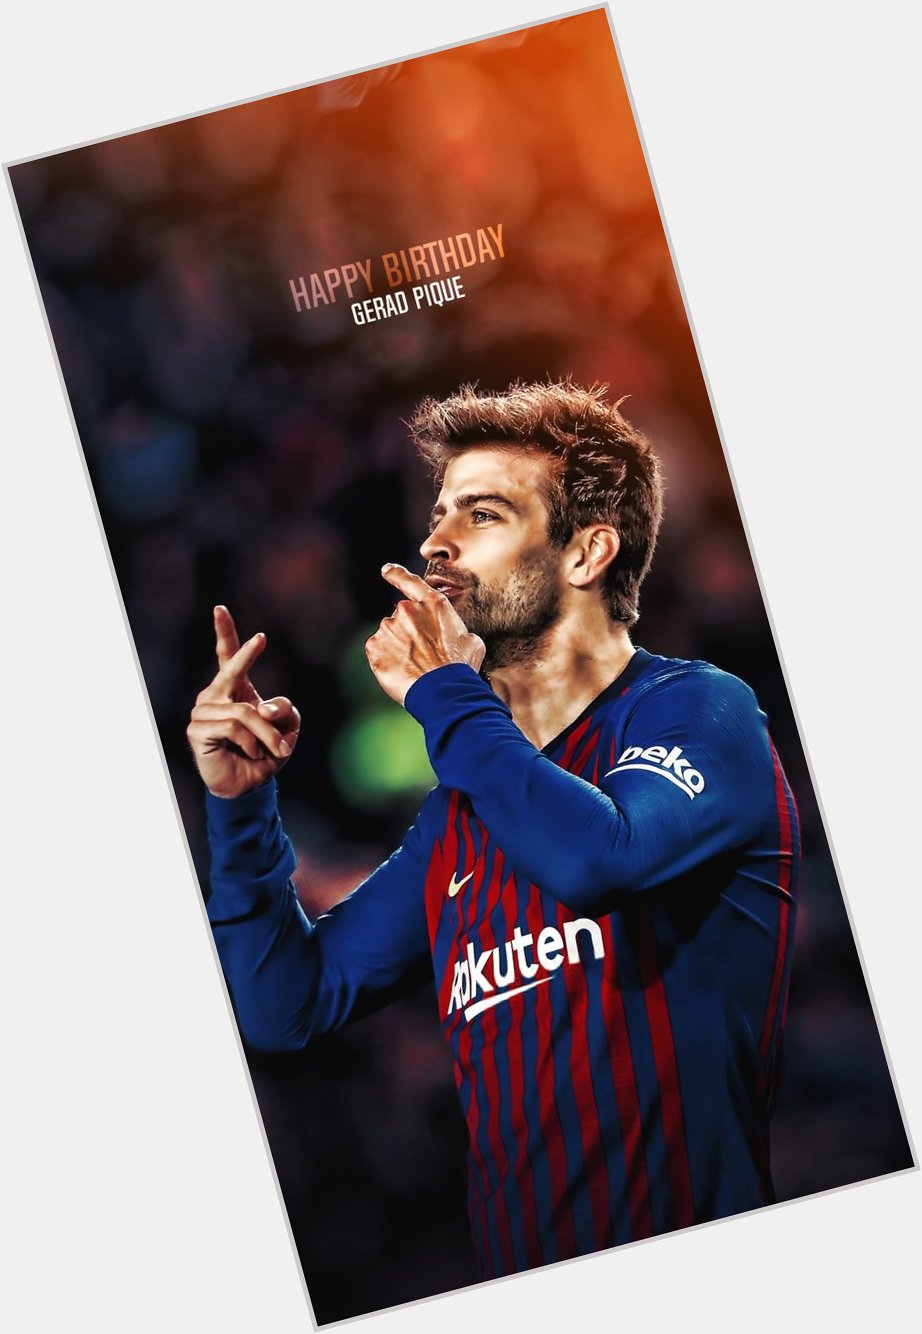  birthday Gerard Piqué   More with work in Barcelona age is just a number  